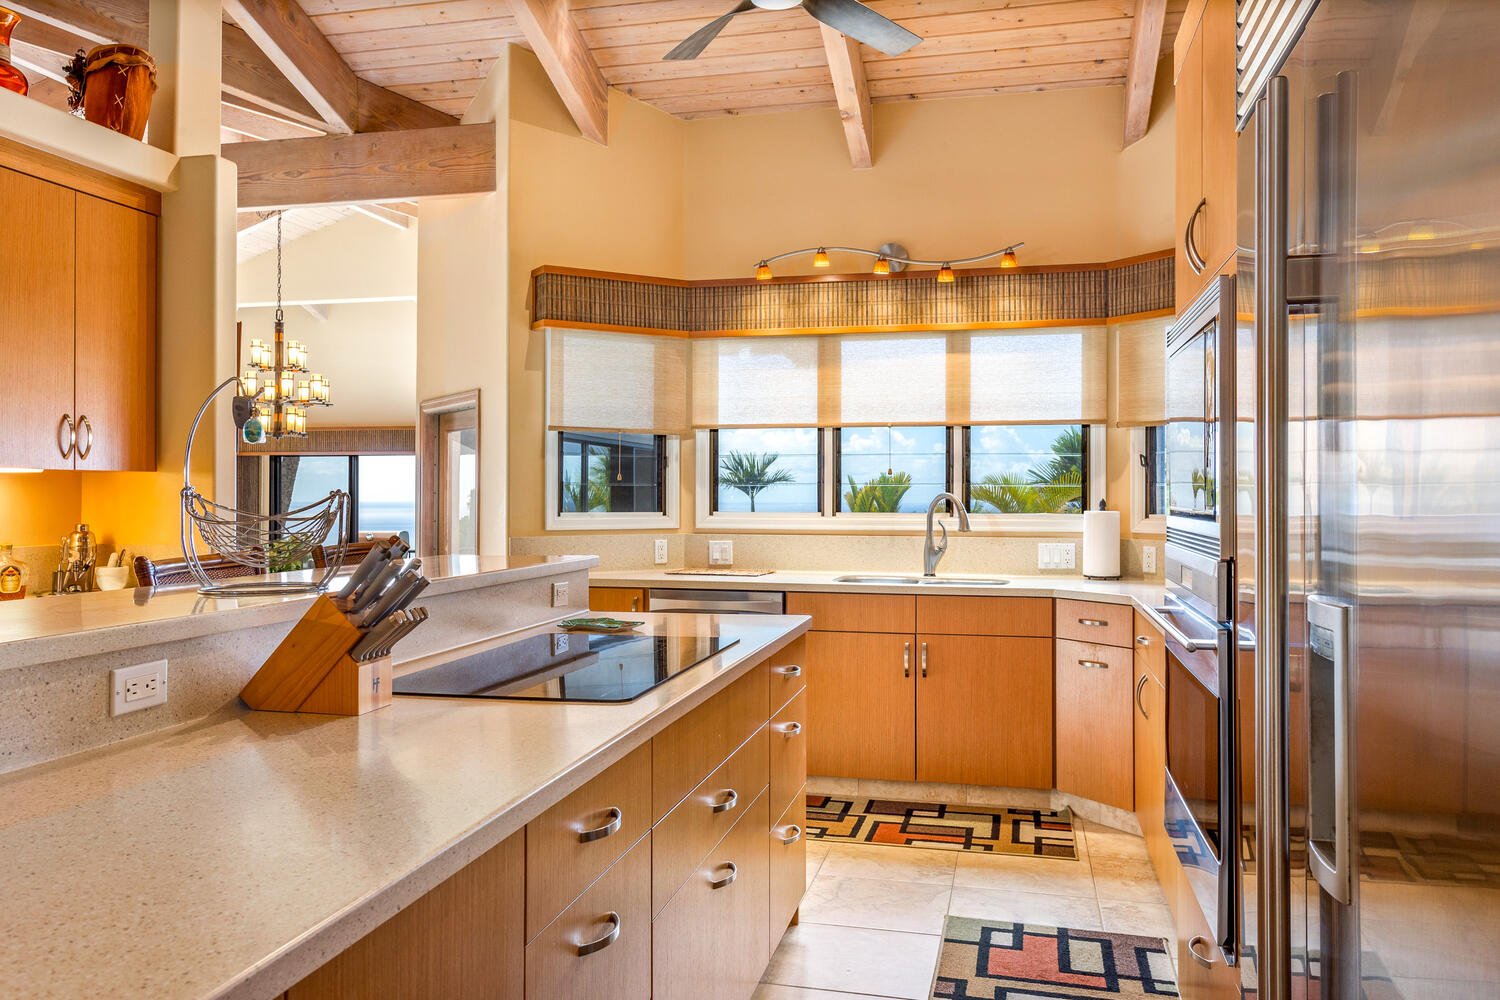 No kitchen will ever offer a better view to the ocean and horizon.